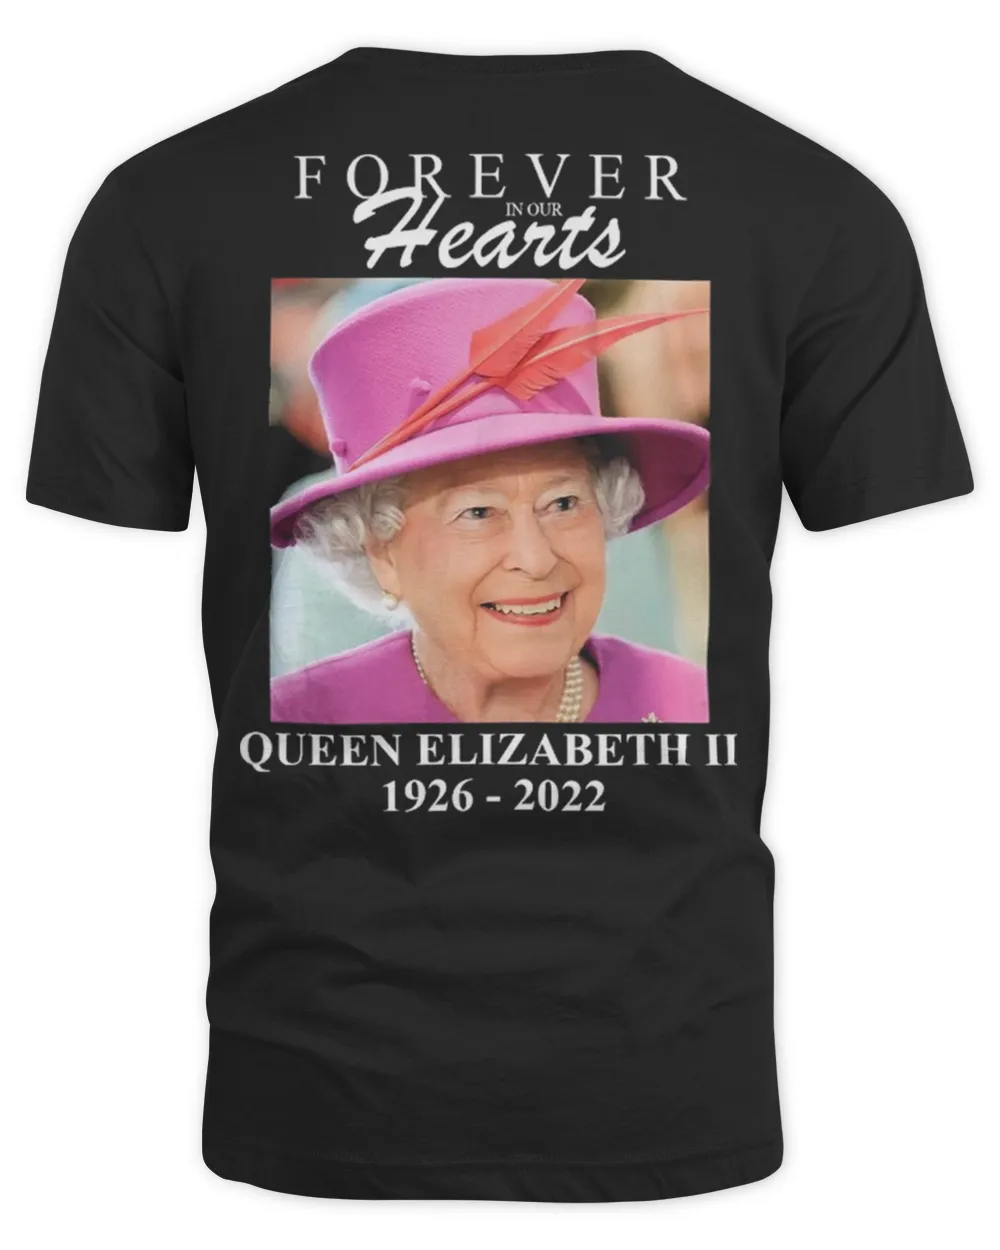 Forever In Our Hearts Queen Elizabeth ll 1926-2022 Shirt